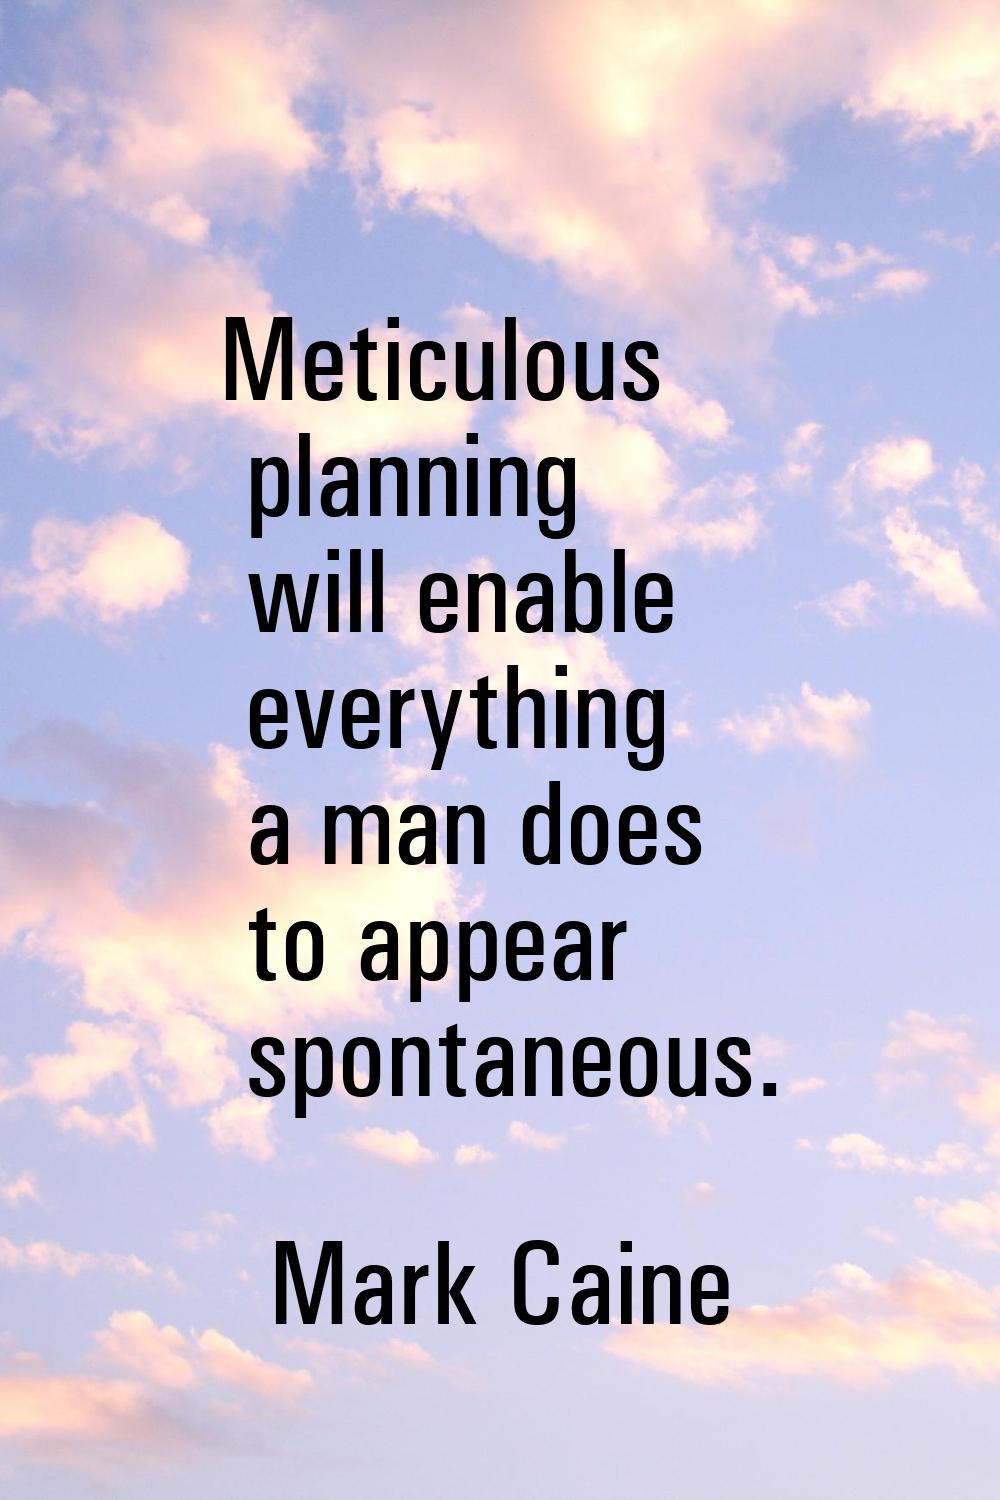 Meticulous planning will enable everything a man does to appear spontaneous.